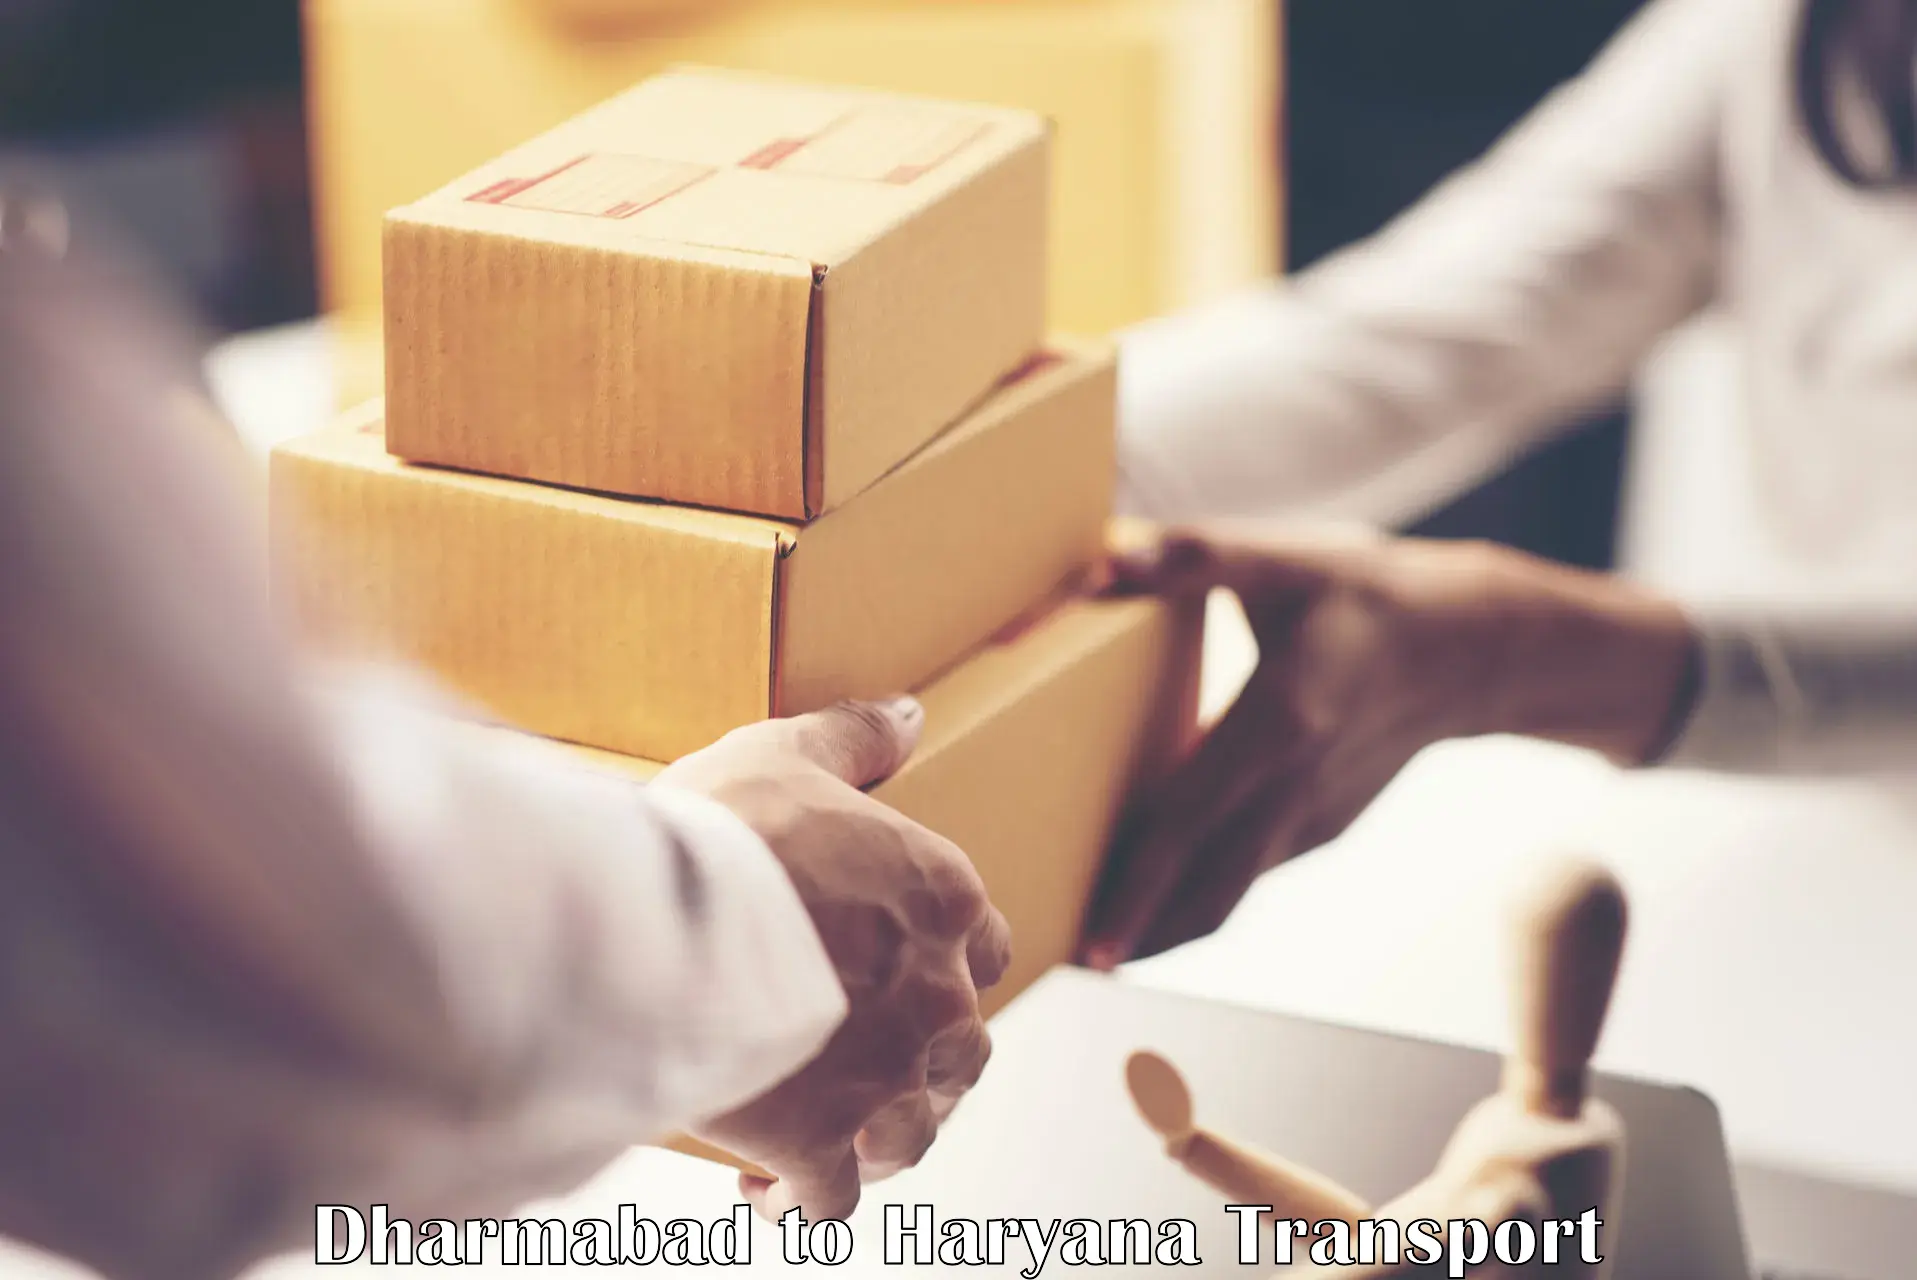 Online transport Dharmabad to Gurgaon